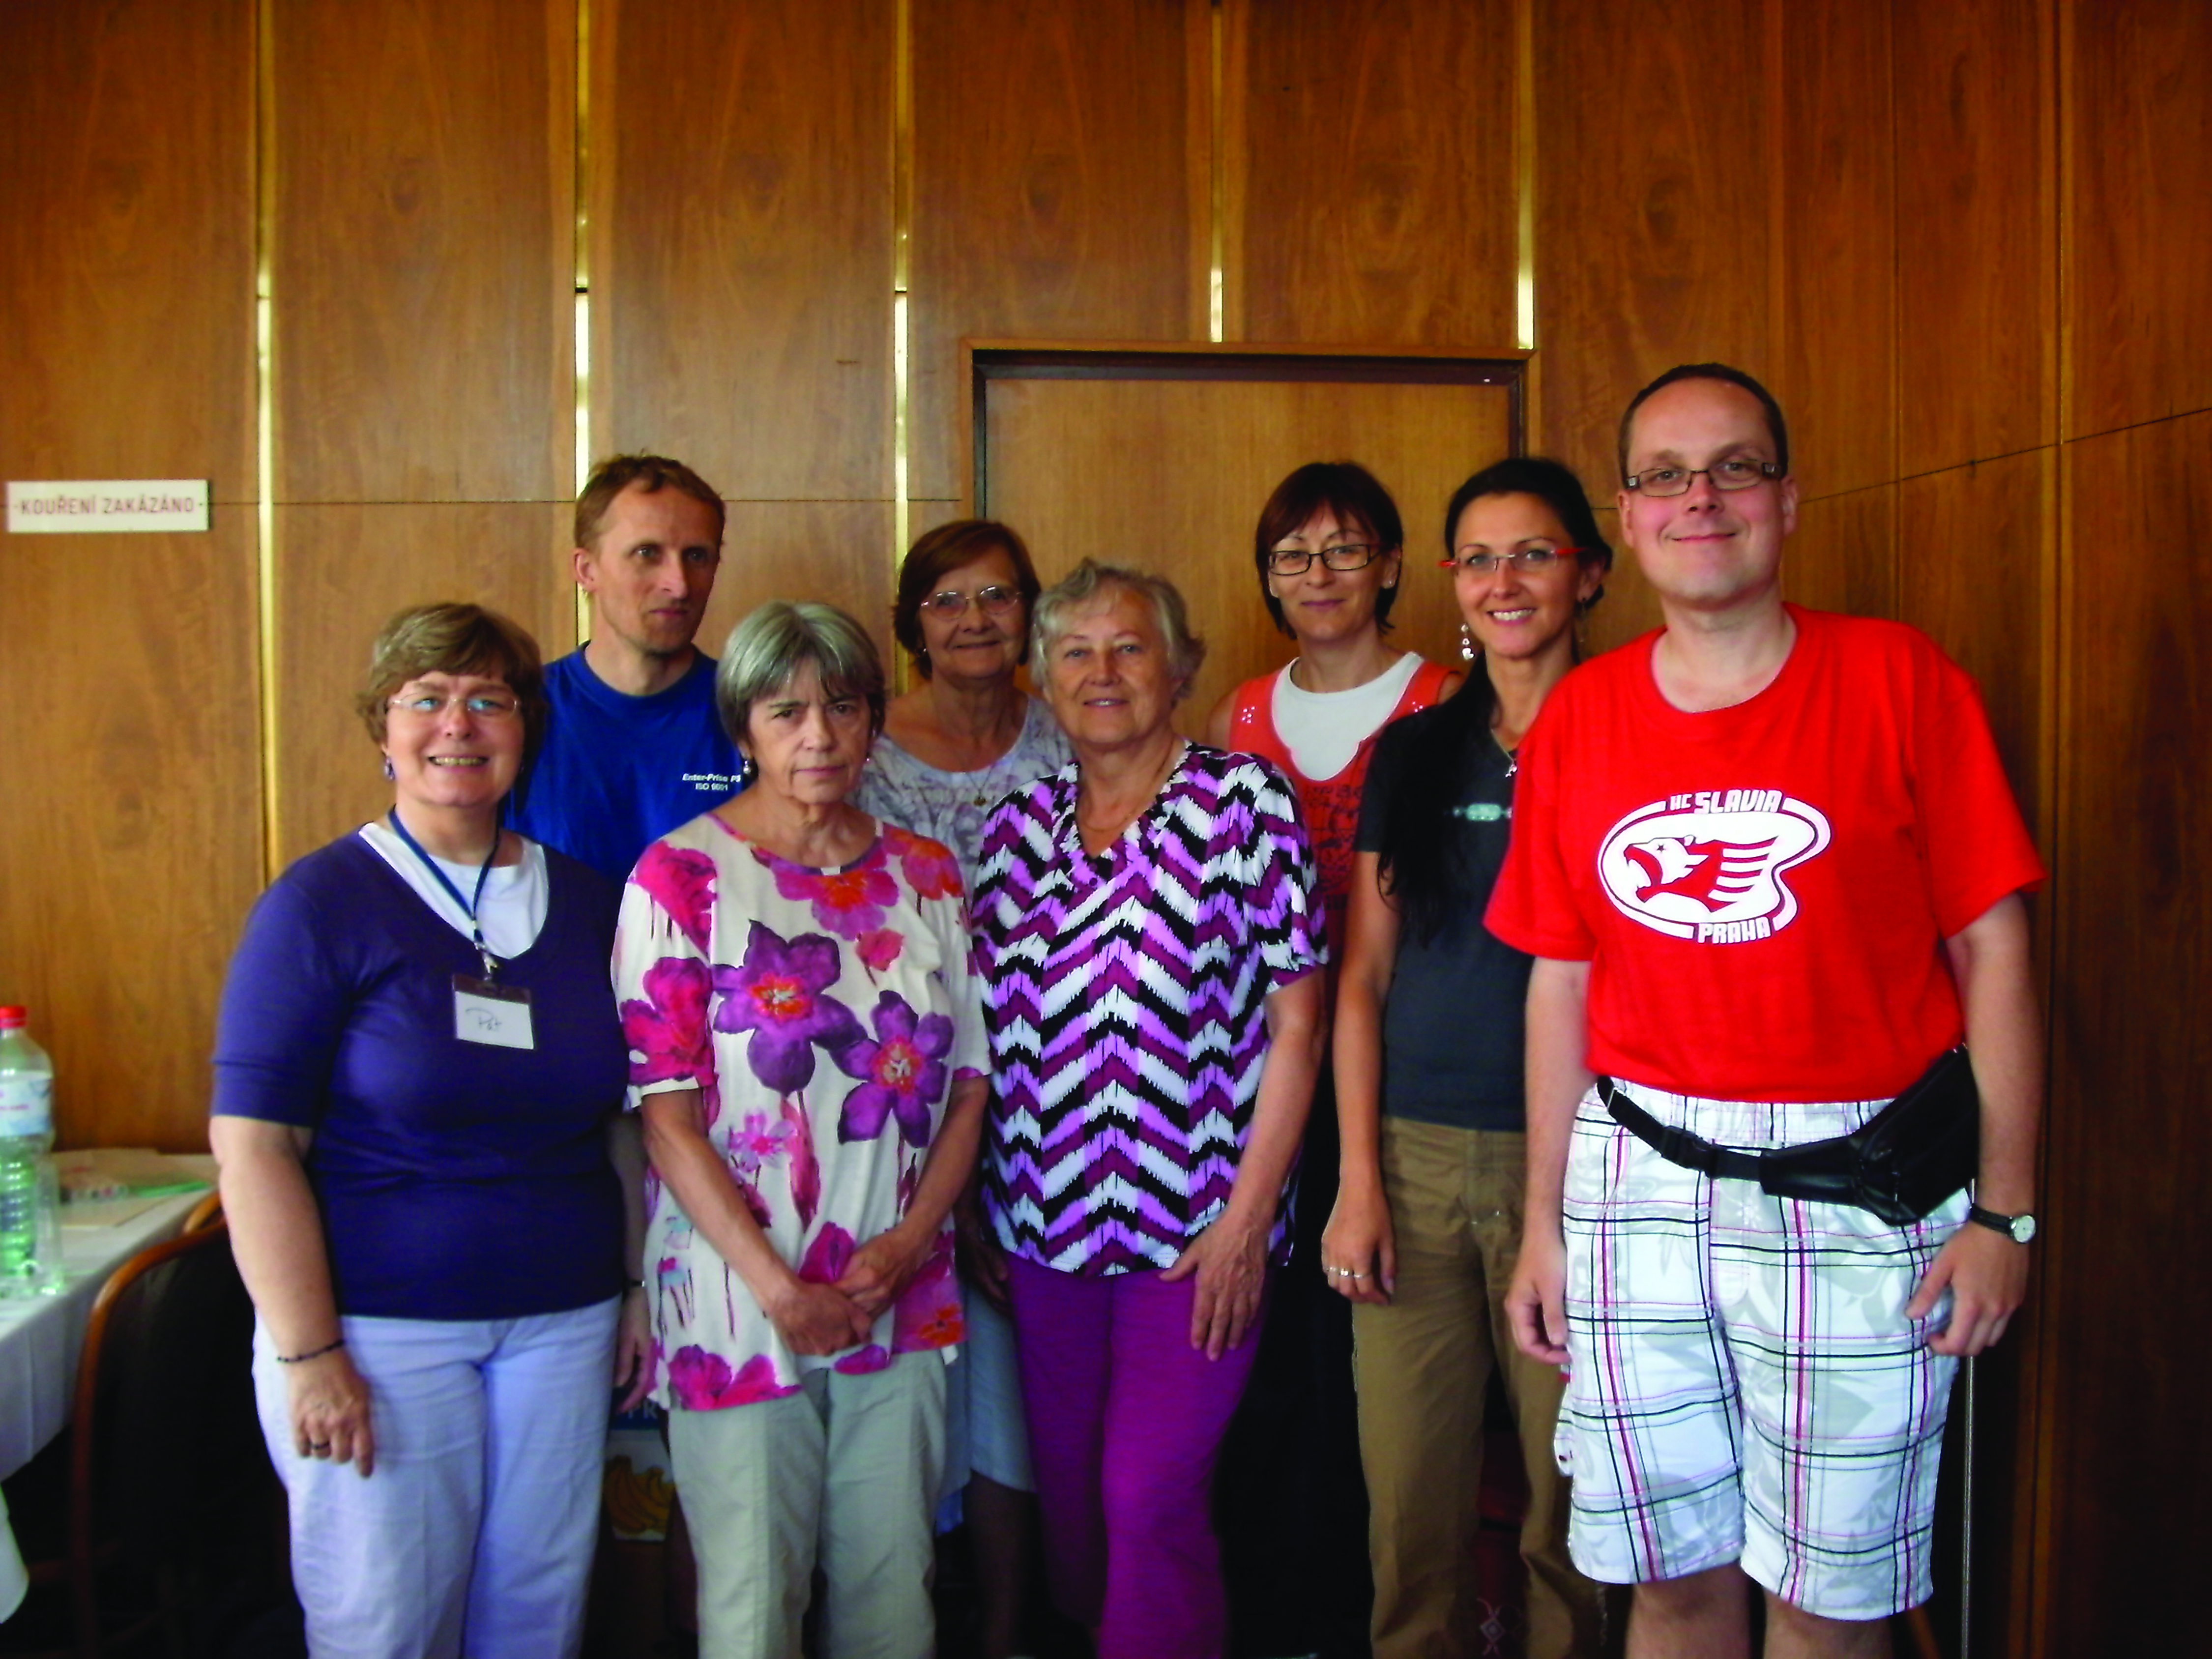 Pat Foster with members of one of her English as a Second Language classes in 2010 in the Czech Republic.